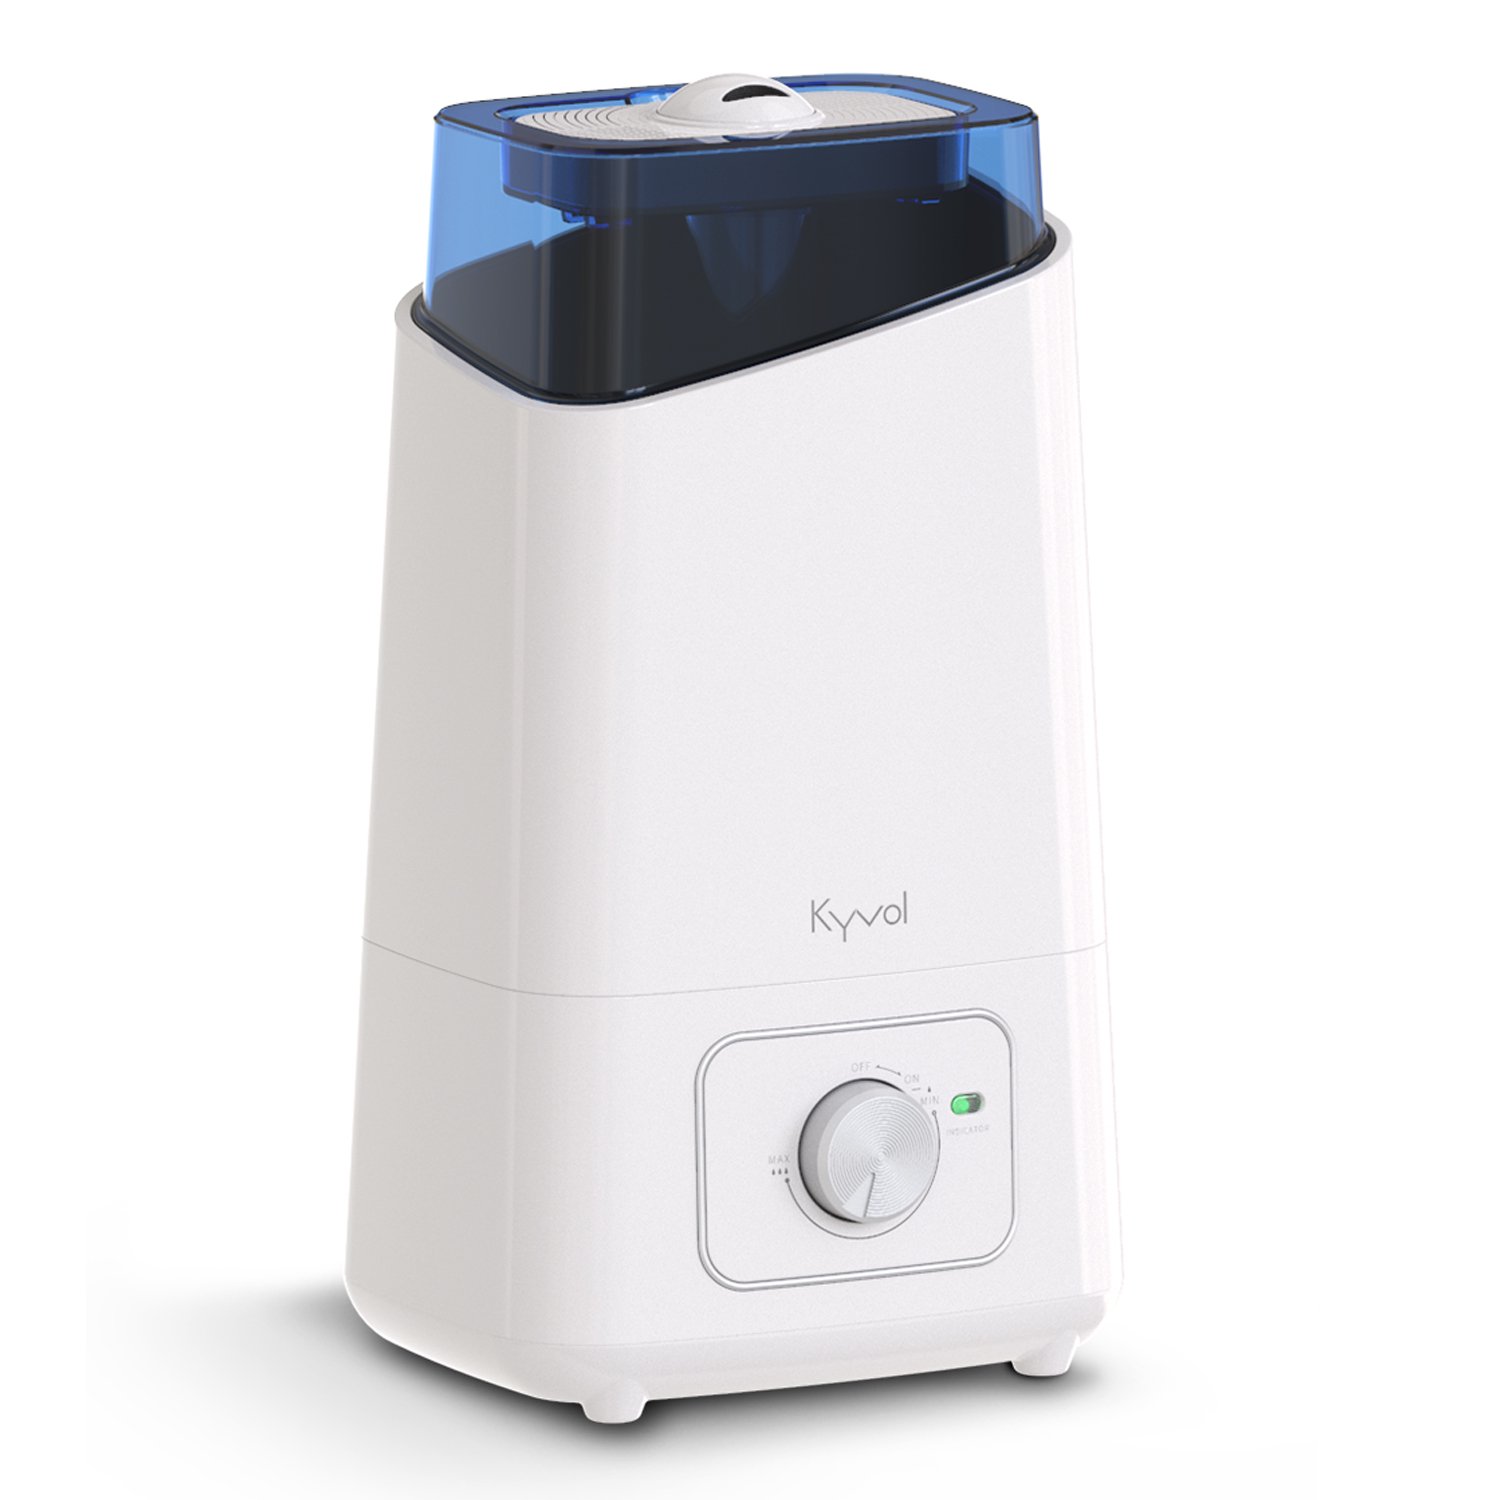 Kyvol Vigoair HD3 Humidifier, 4.5 L Cool Mist Humidifiers, 26 dB Quiet Ultrasonic Humidifiers, up to 75 Hours Runtime, BPA-Free, Auto Shut-Off, 360° Nozzle, Ideal for Plants, Home, Office, Baby